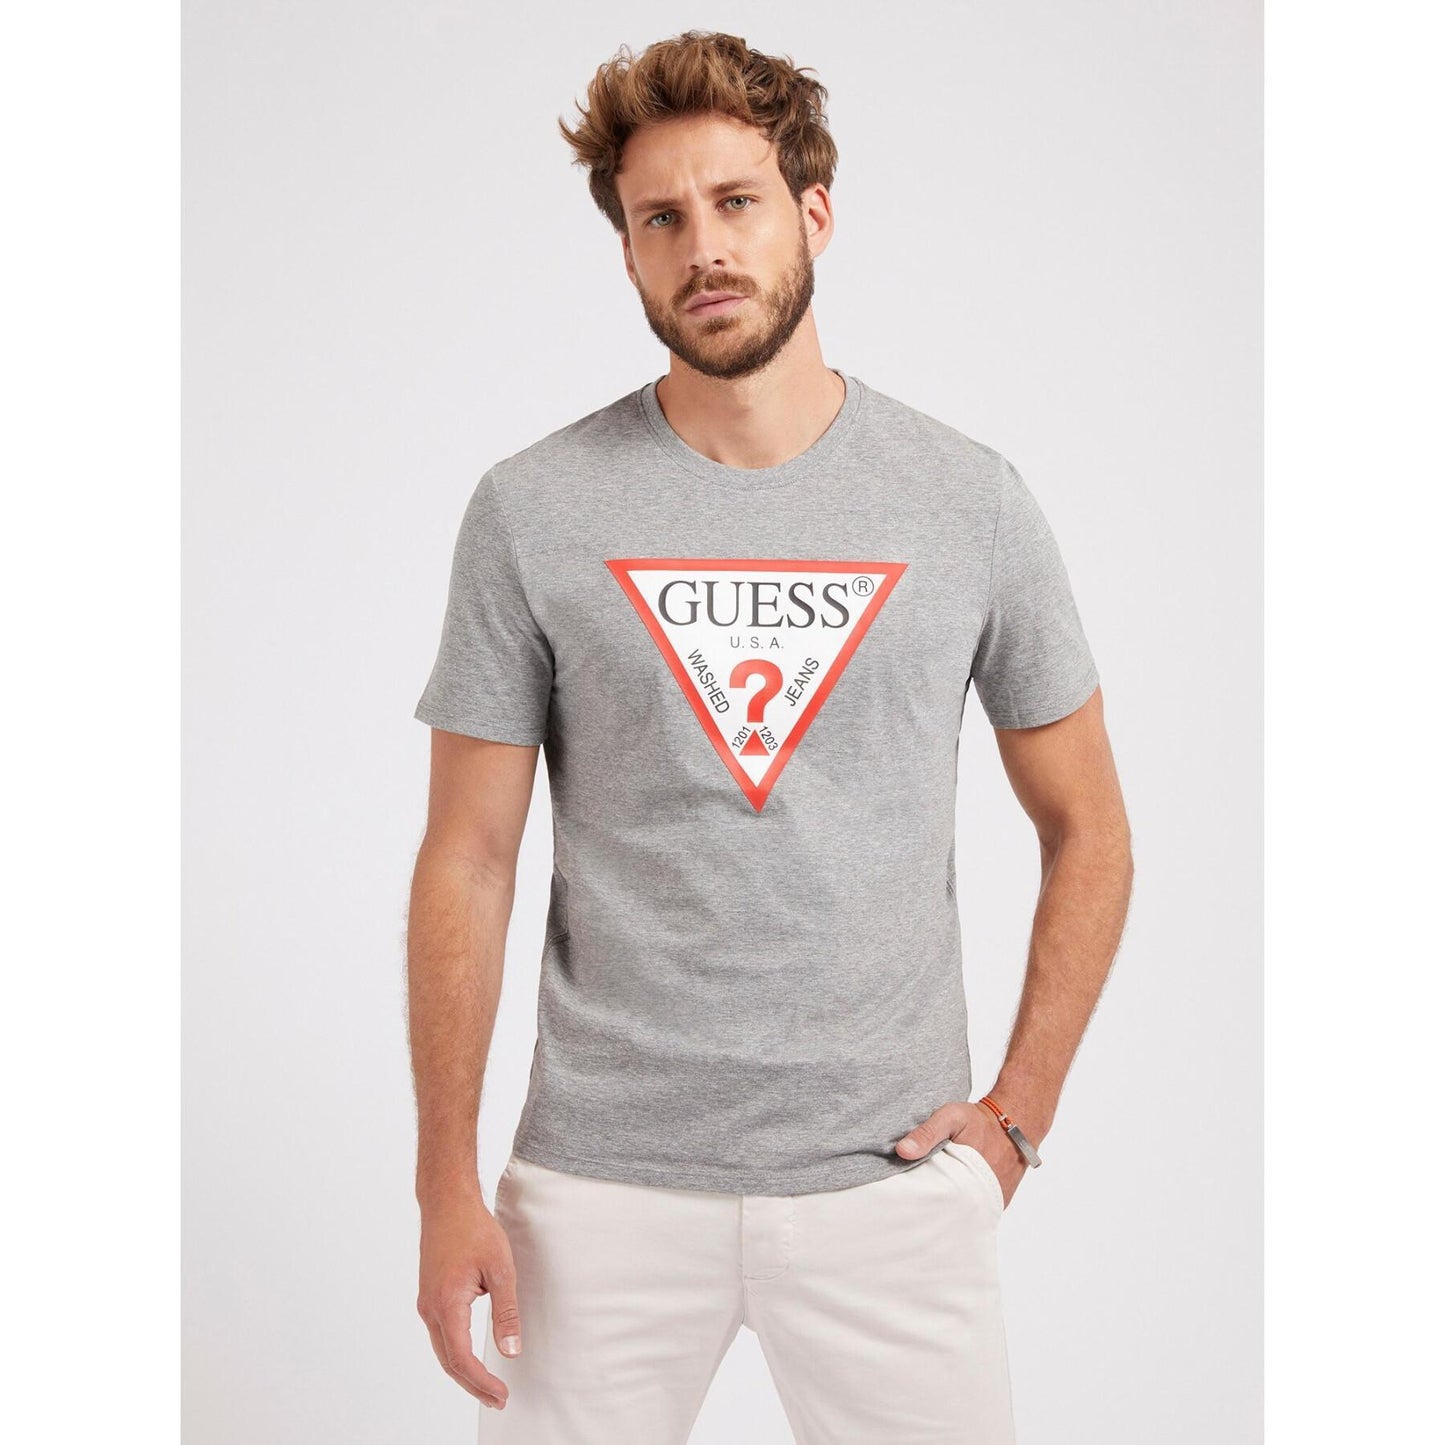 Guess Triangle Vintage Logo Tee - Heather Gray